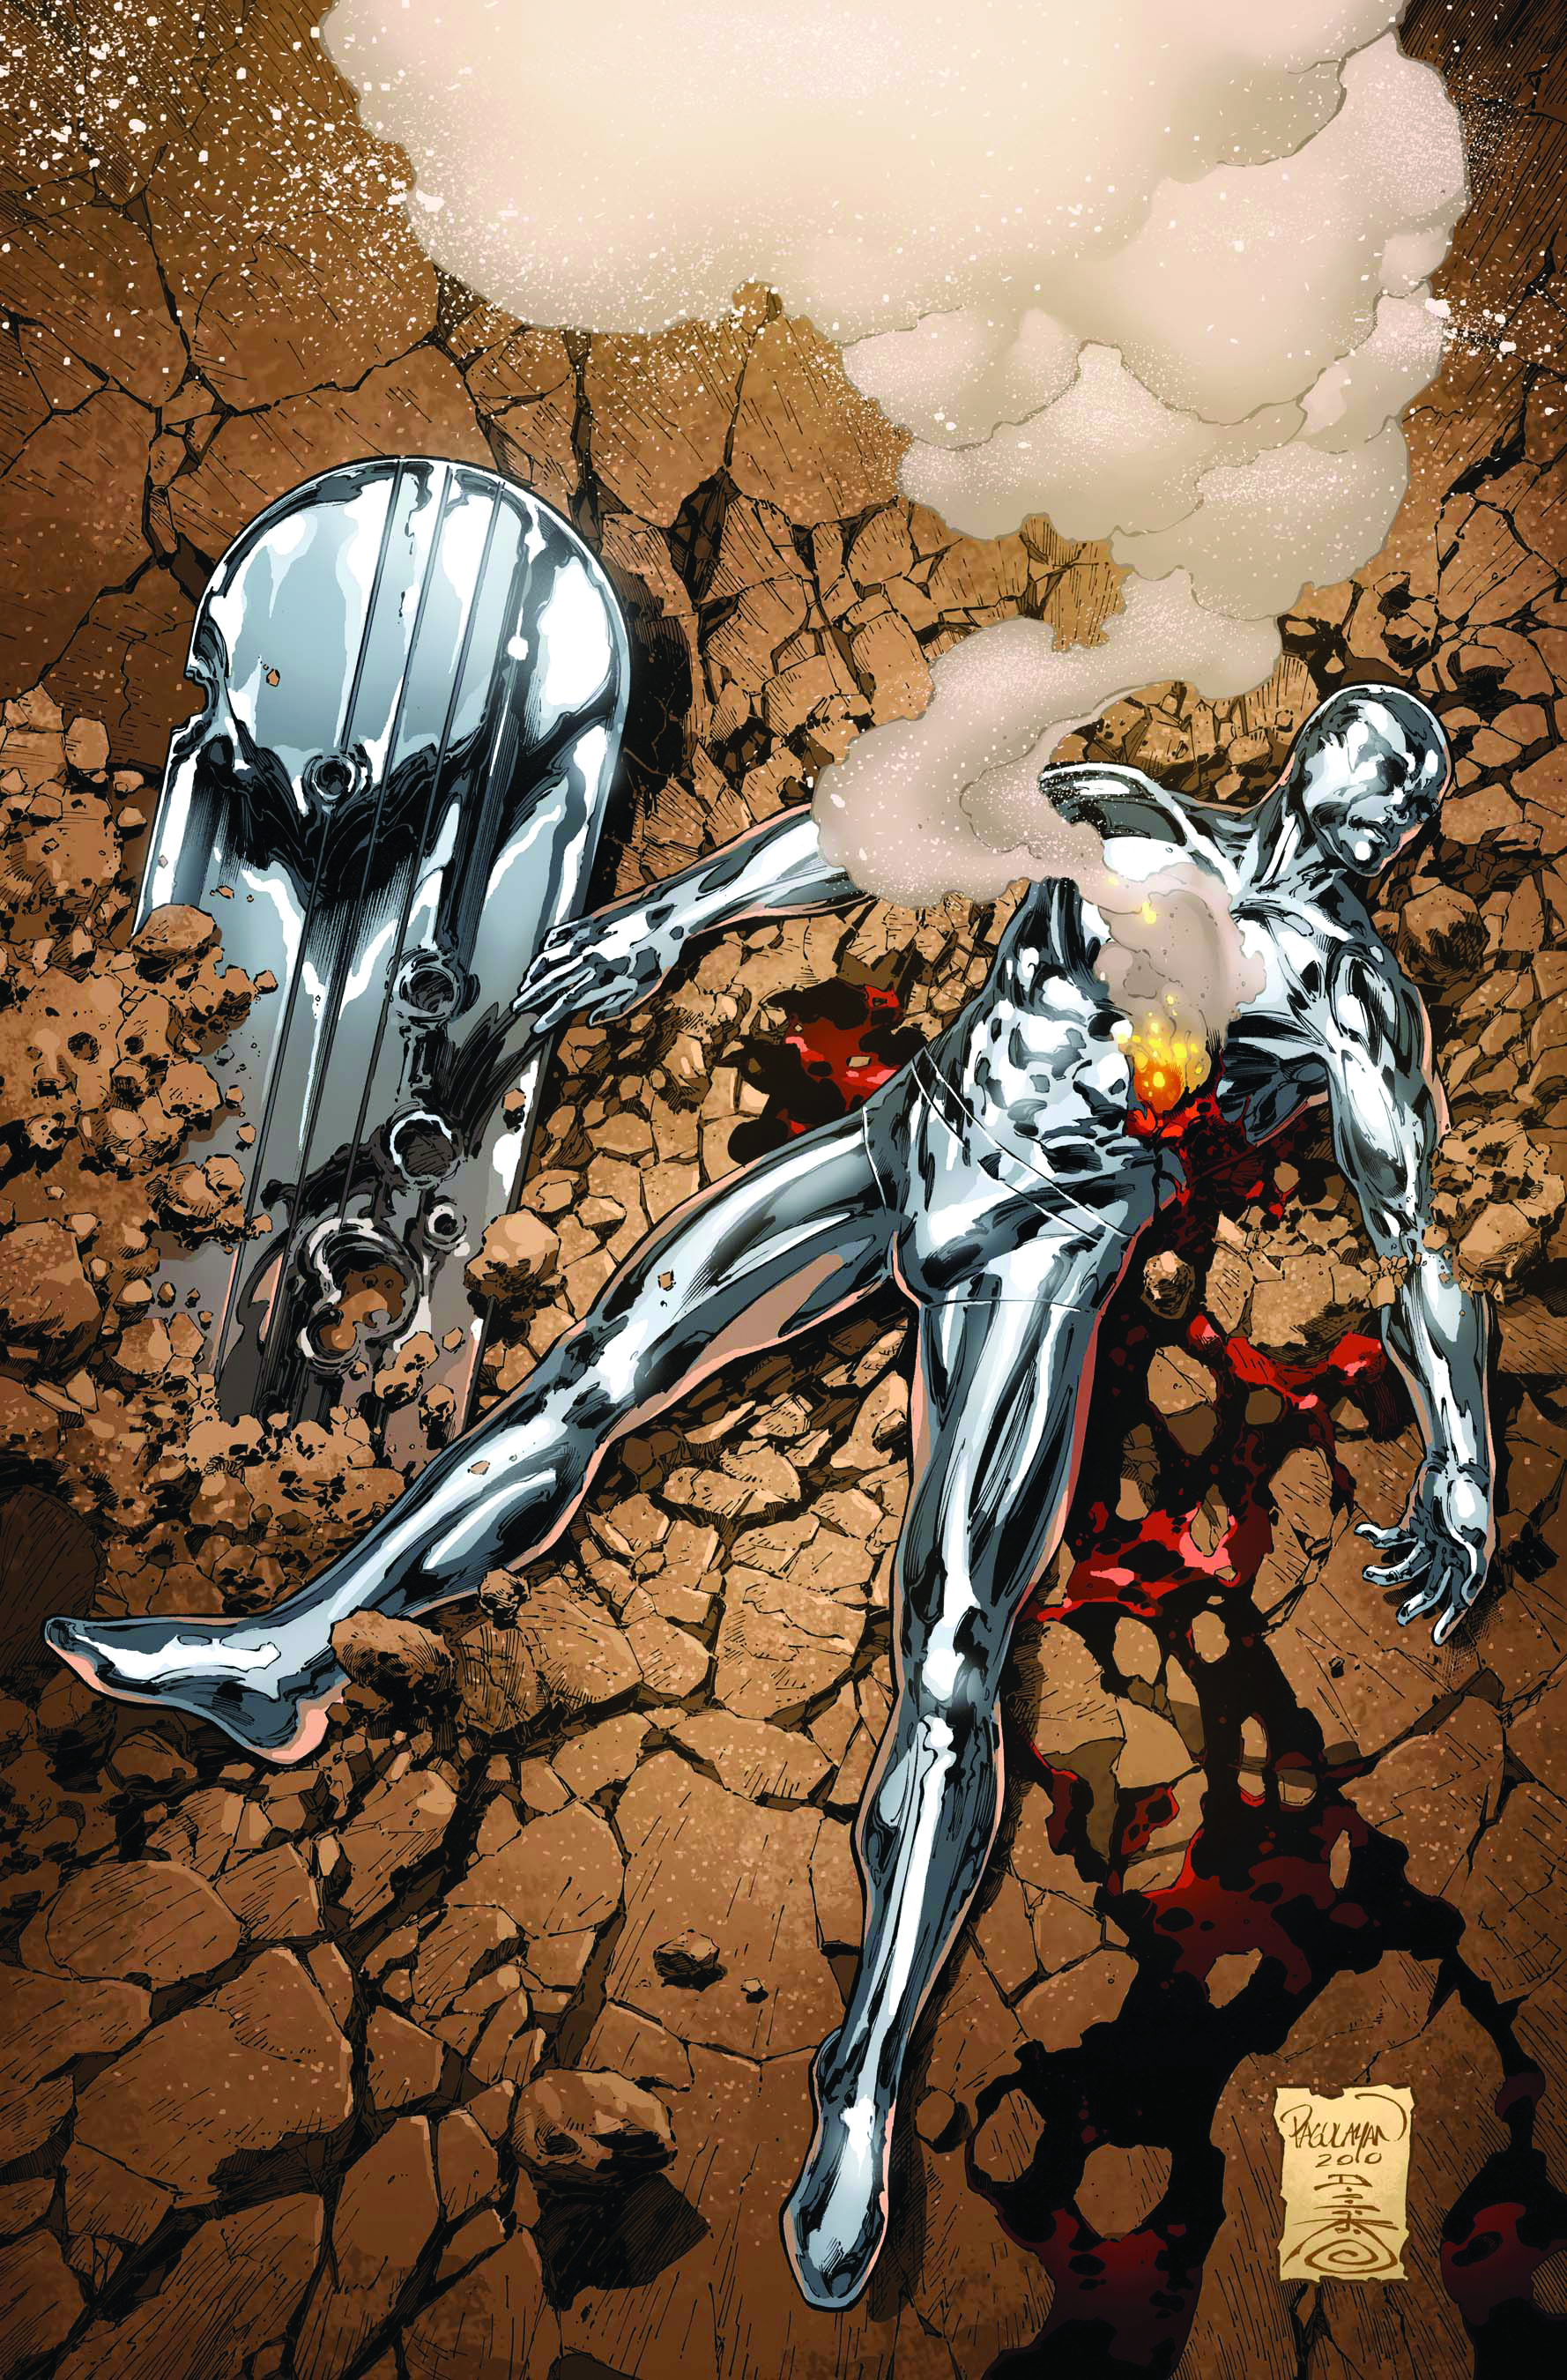 SILVER SURFER #2 (OF 5)